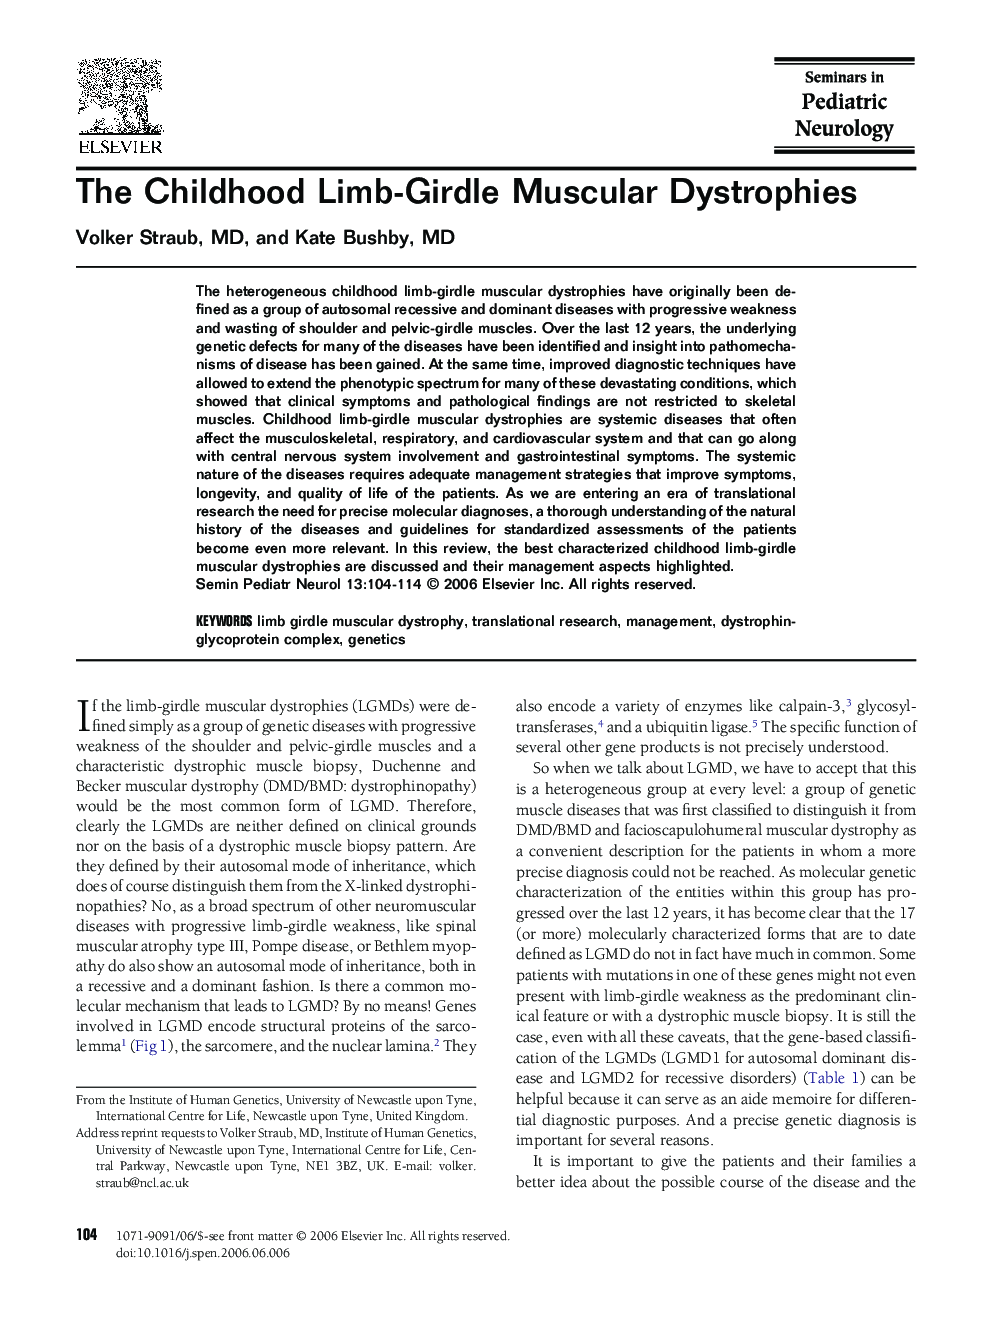 The Childhood Limb-Girdle Muscular Dystrophies